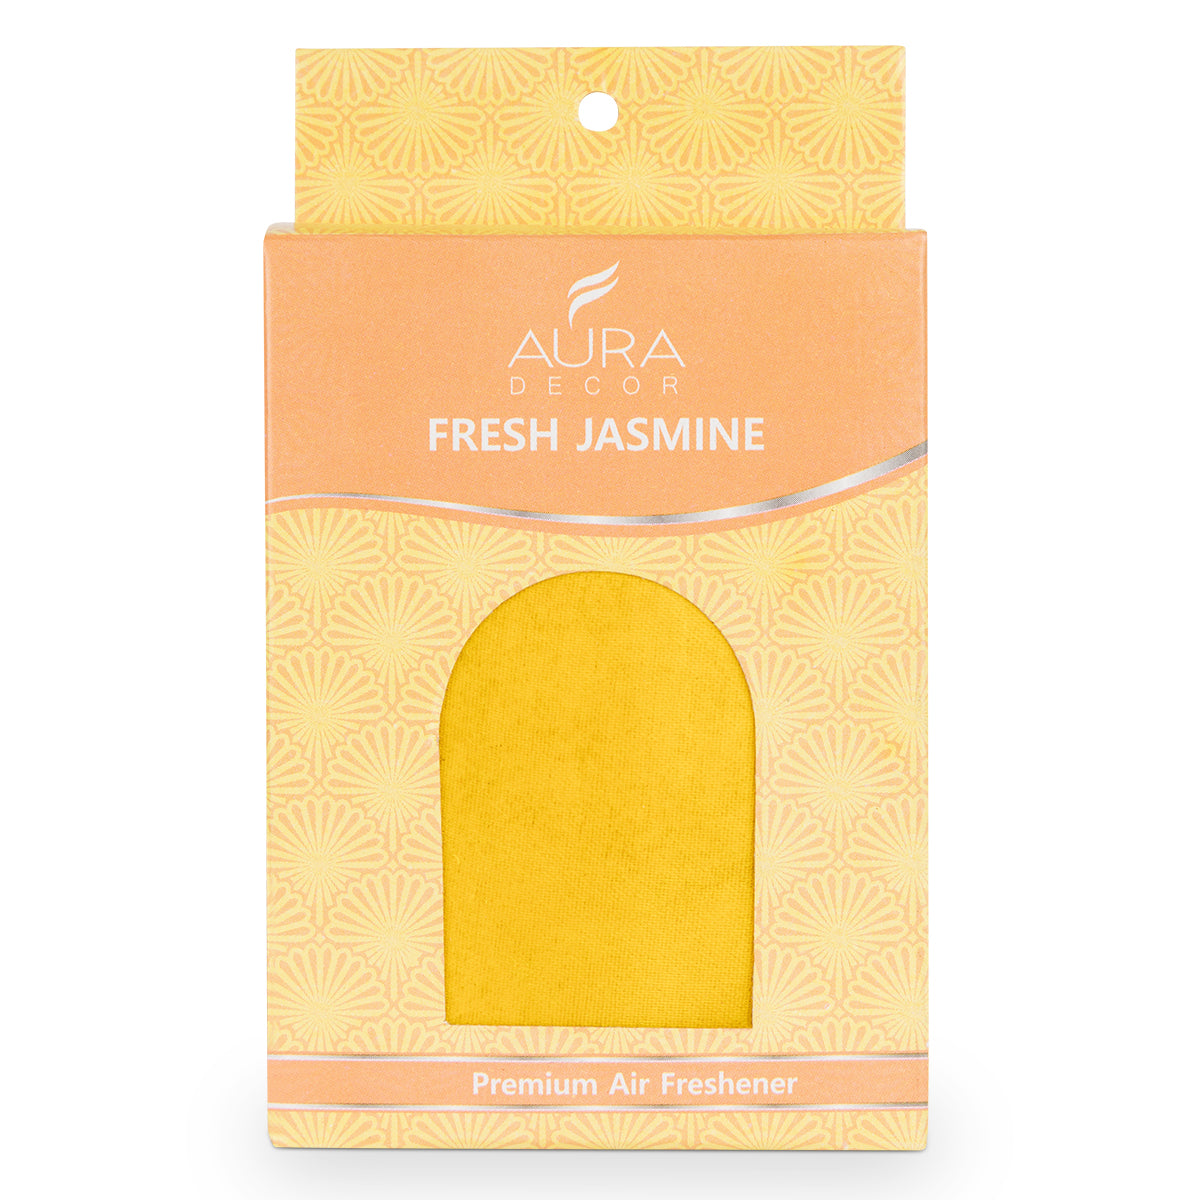 Air Perfume/Air Fresheners Pouch Bag for Office/Room/Car/Toilet and Wardrobe (Pouch Pack 40 gm) (Fresh Jasmine)